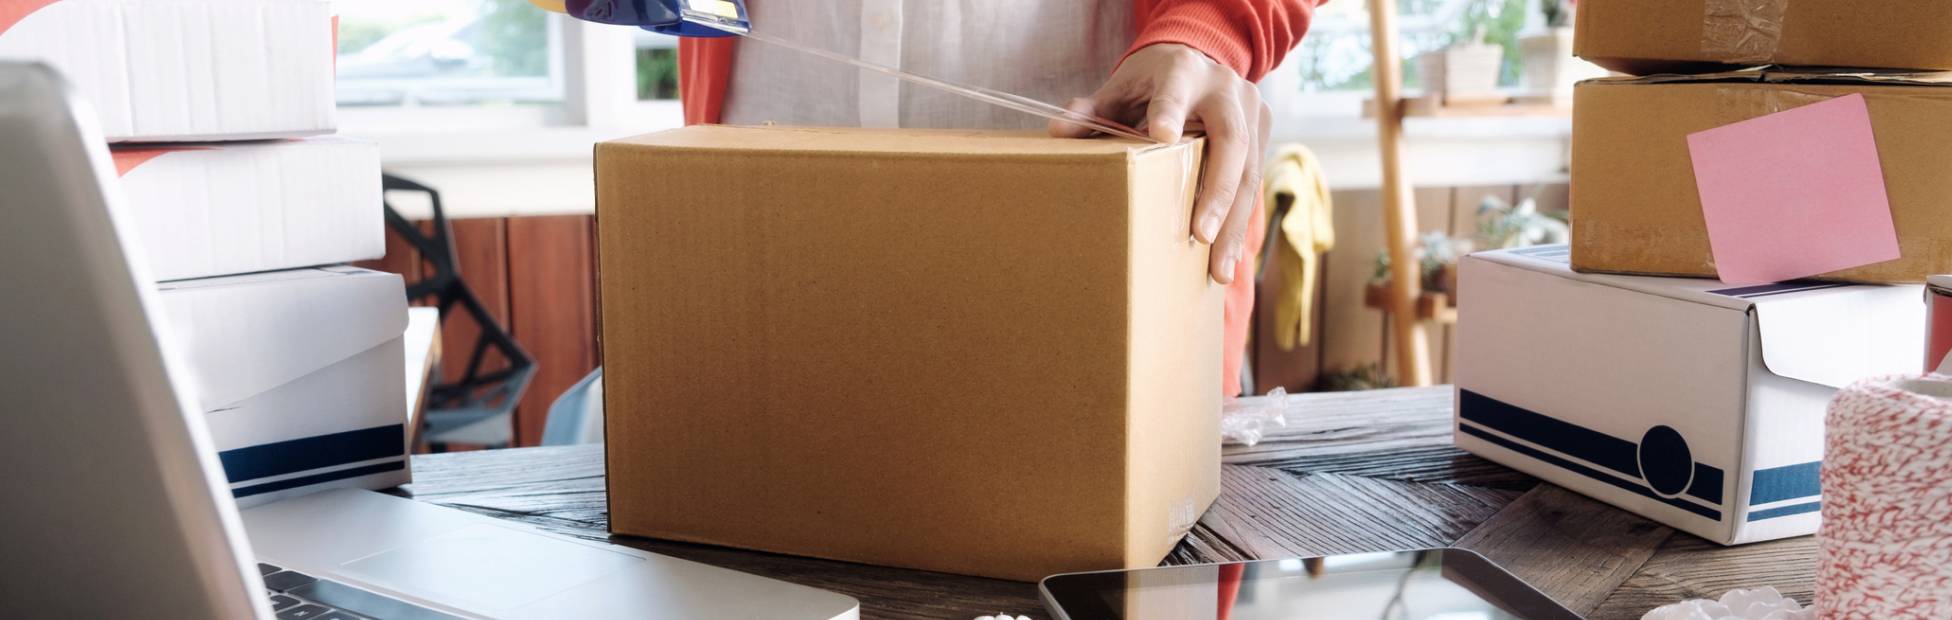 Person packing a cardboard box